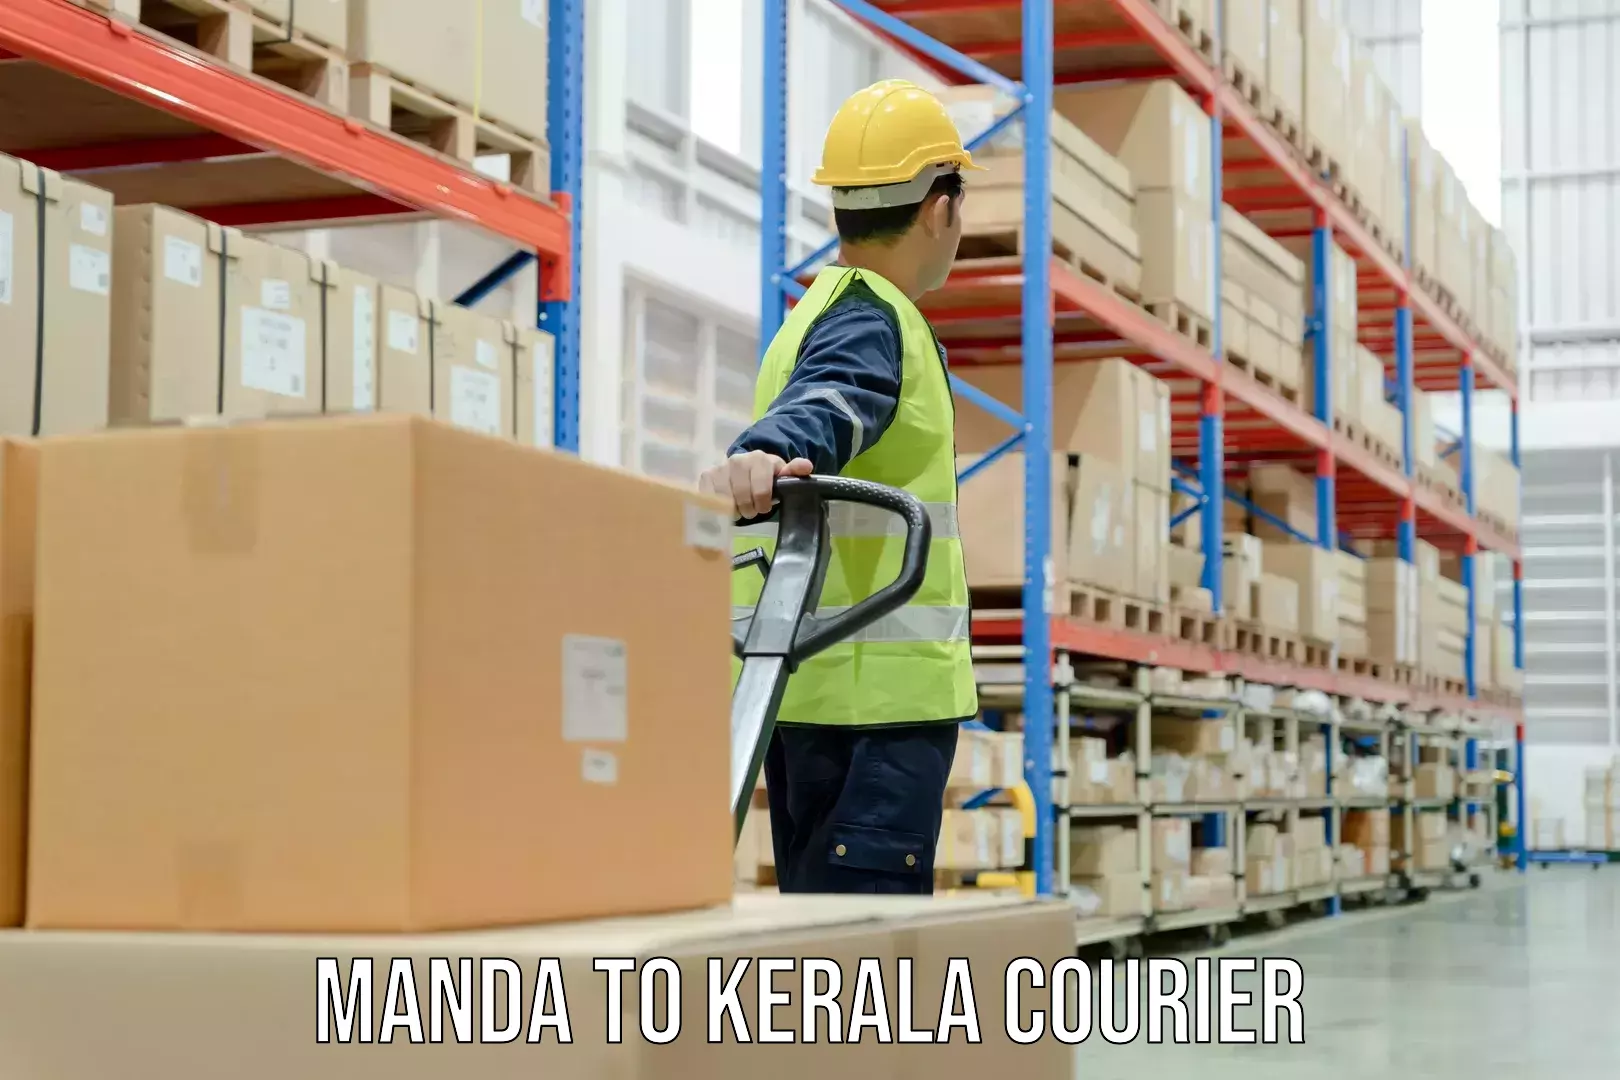 24-hour delivery options in Manda to Kerala